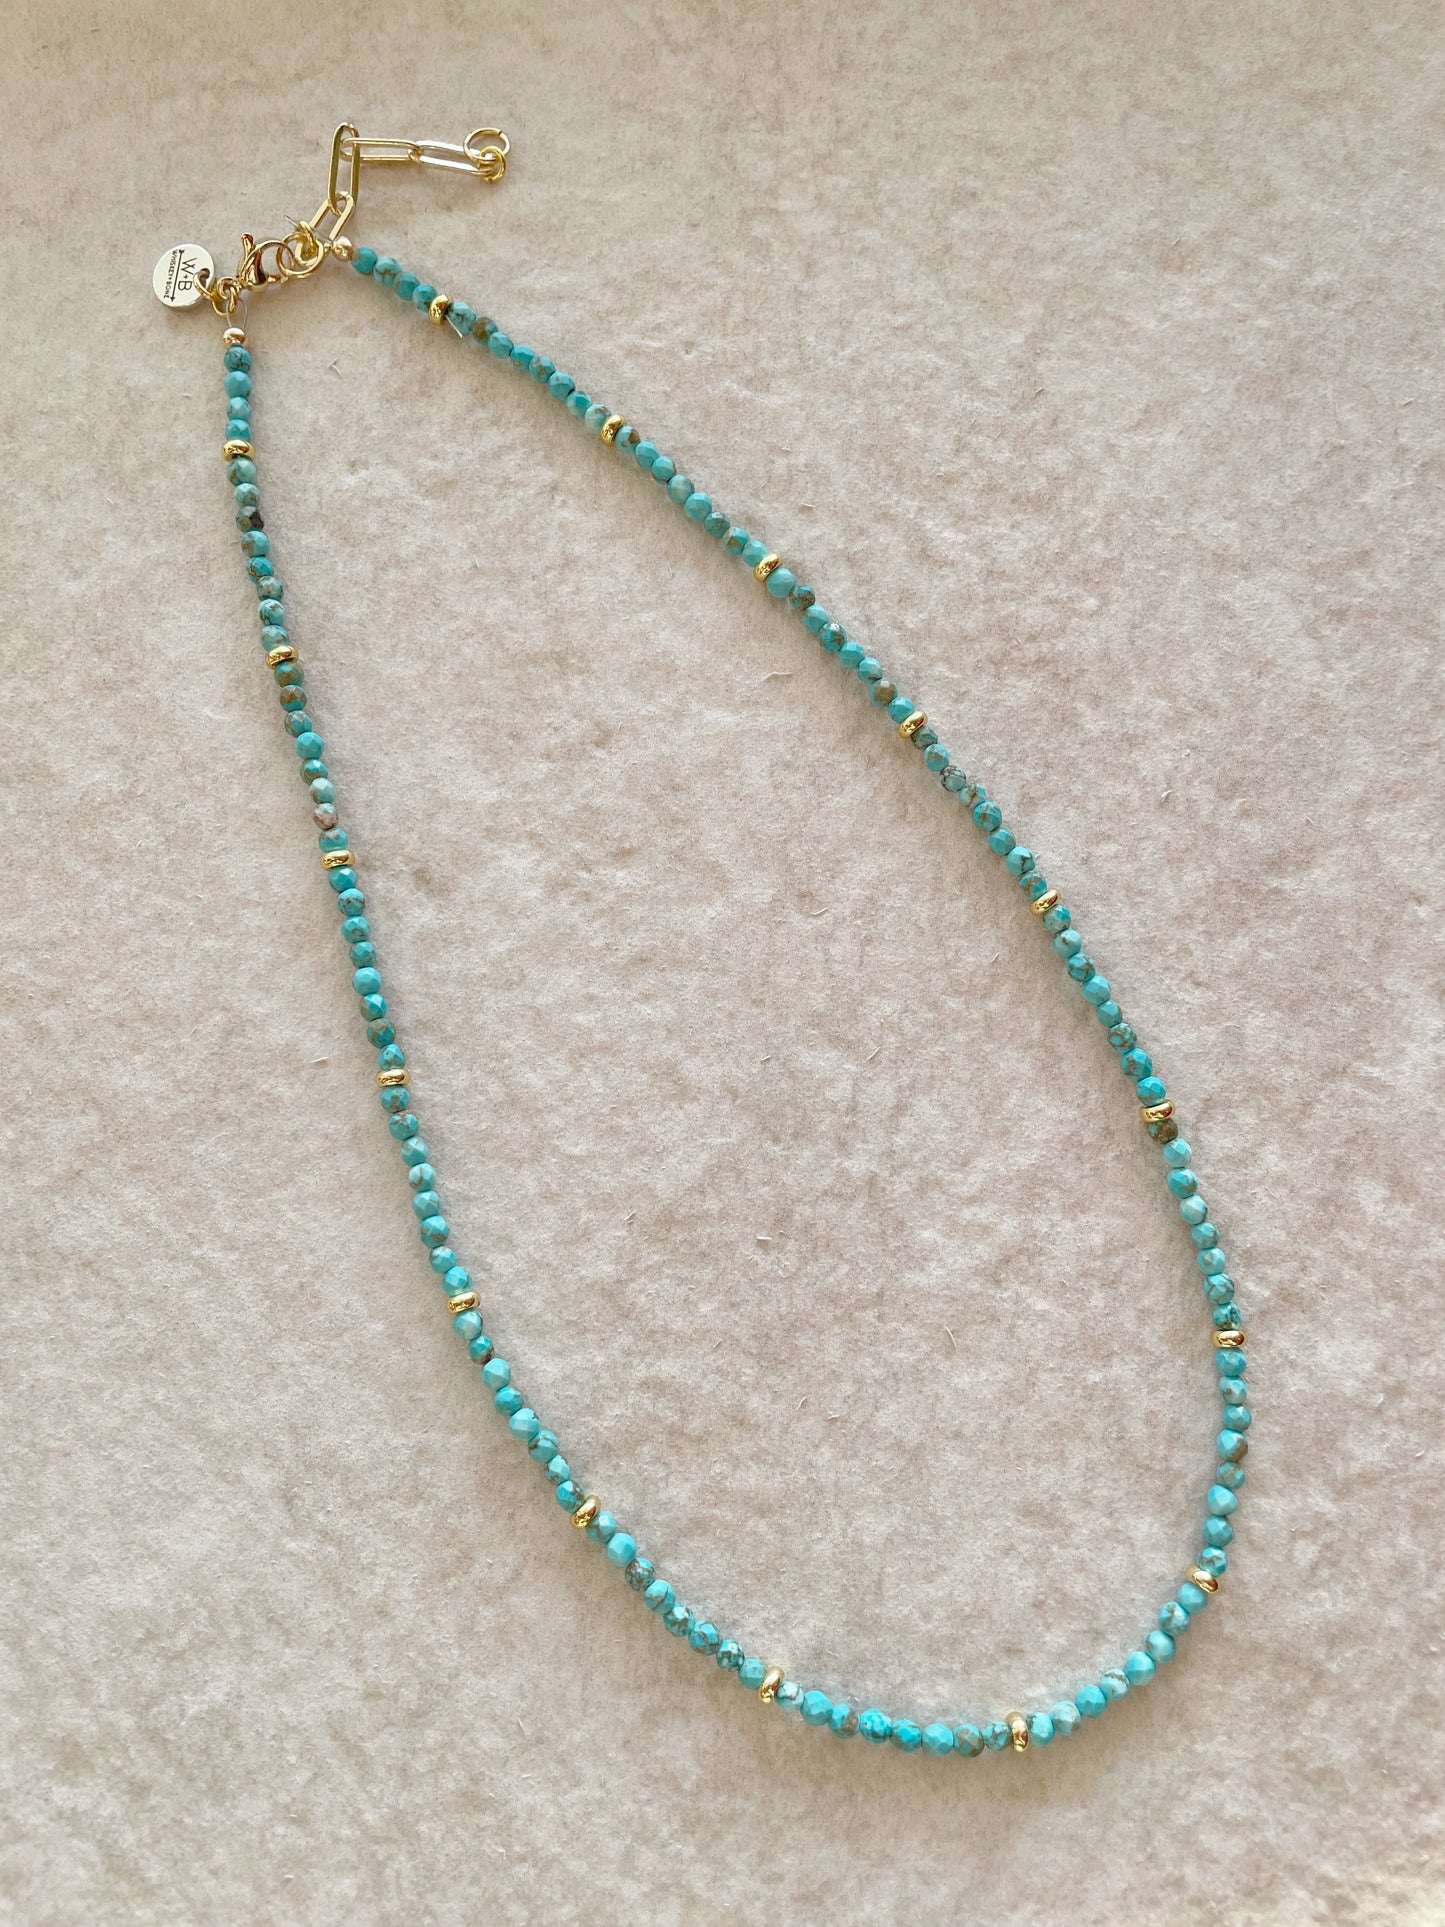 Tiny Dancer Necklace // Turquoise